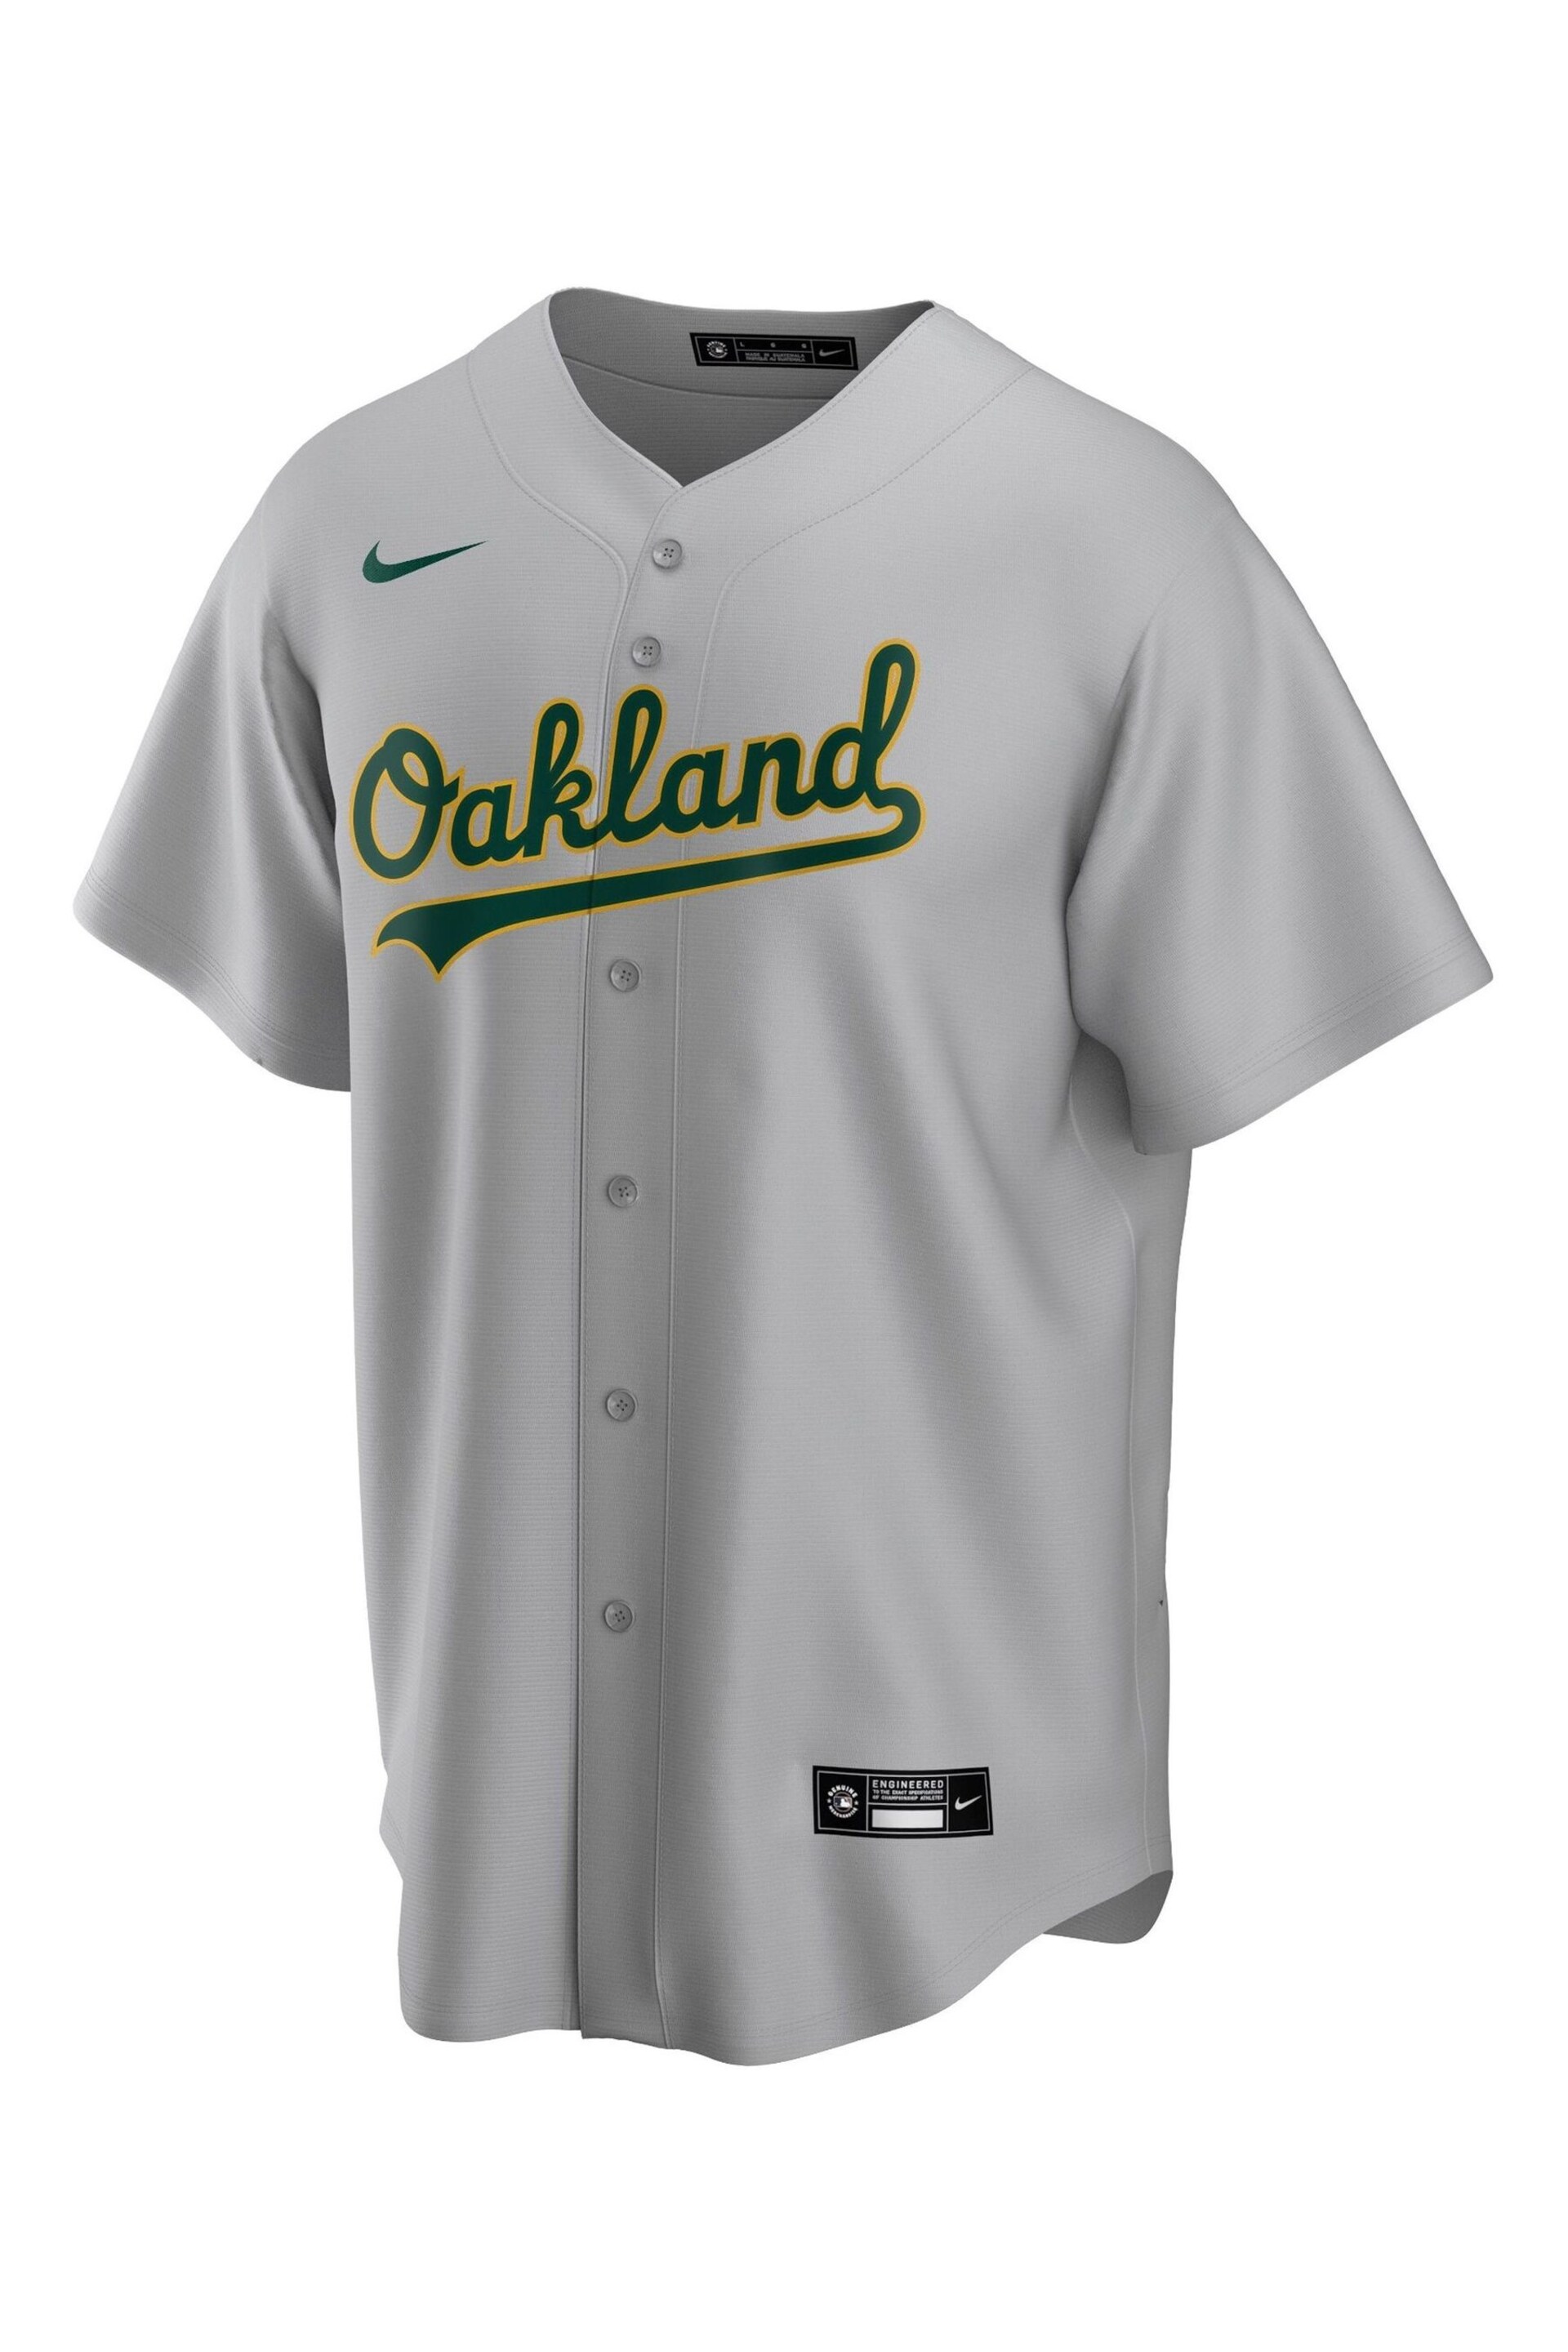 Nike Grey Oakland Athletics Official Replica Road Jersey - Image 2 of 3